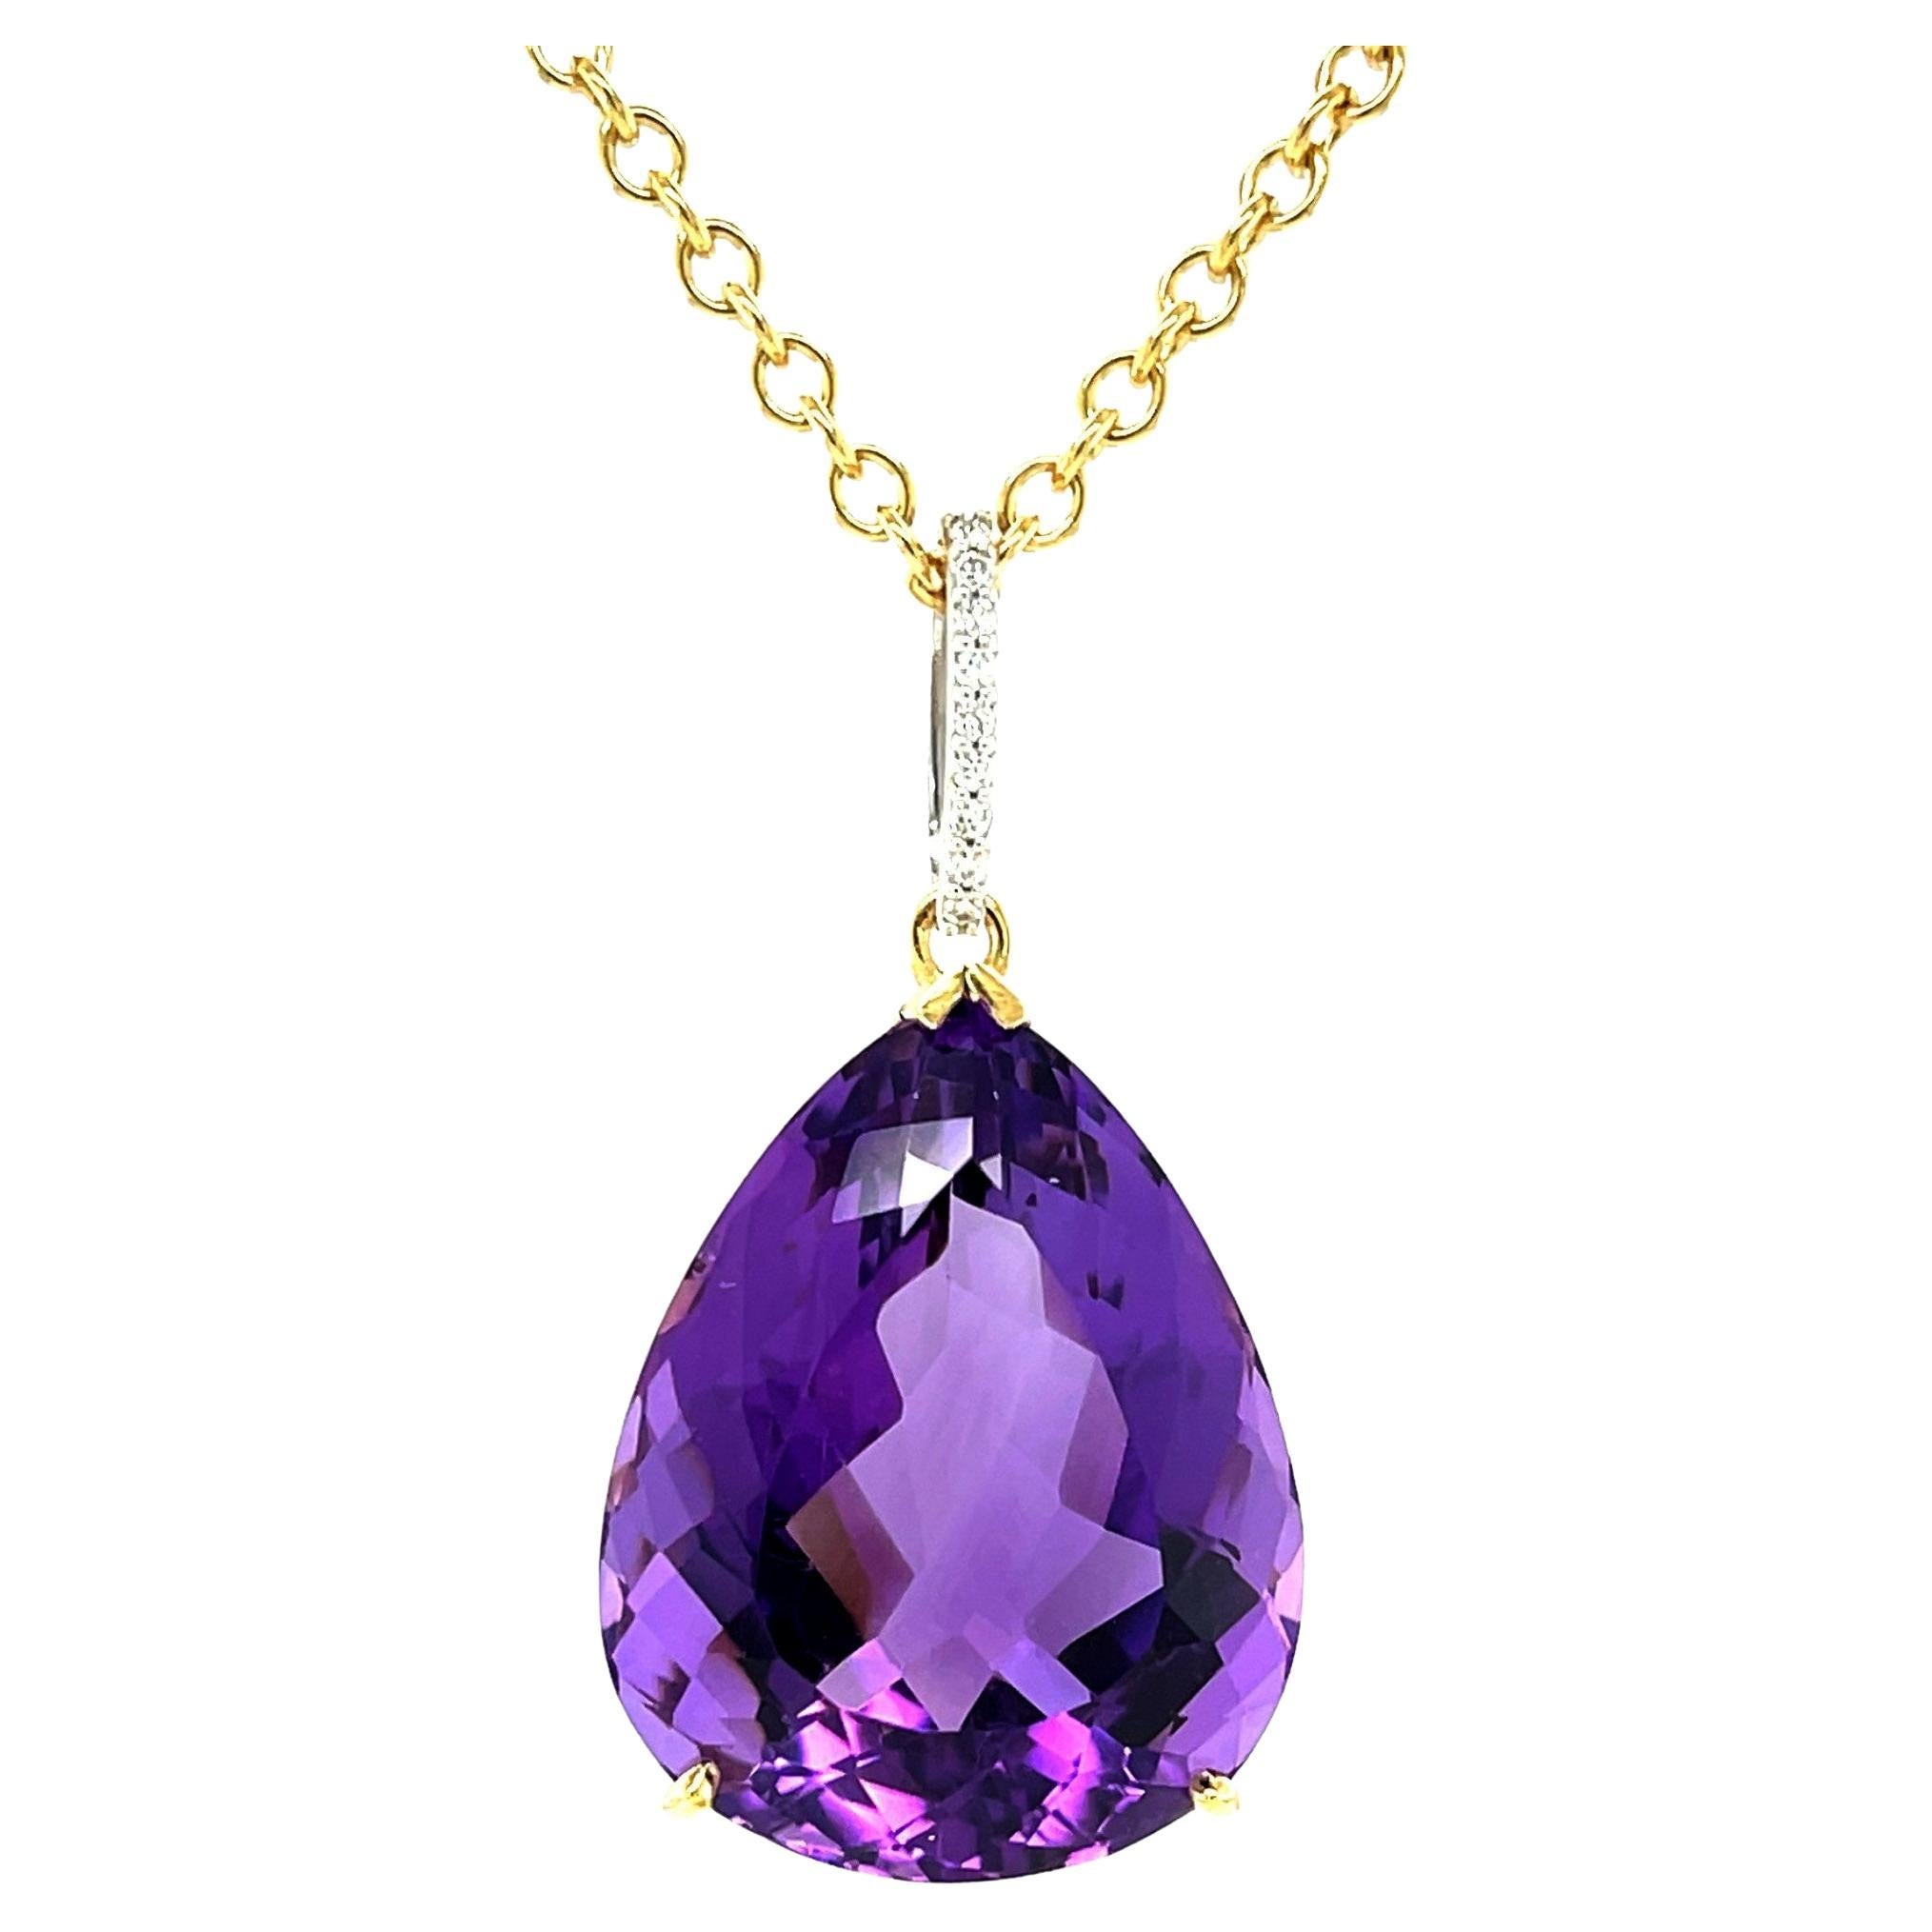 40 Carat Pear Shape Amethyst and Diamond Pendant in 18k Yellow Gold with Chain For Sale